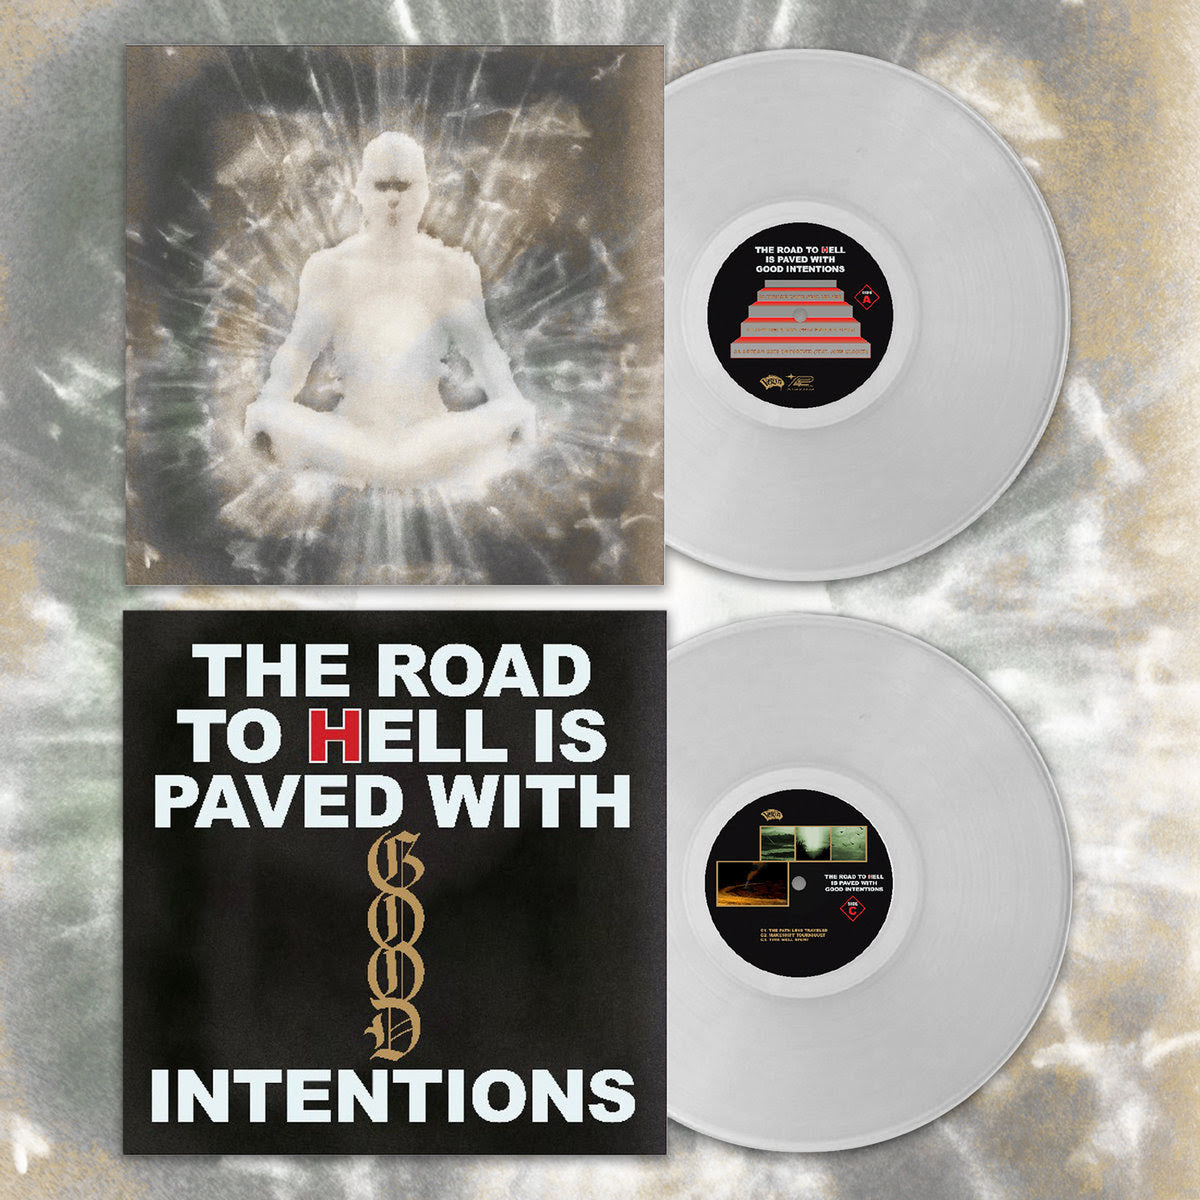 Vegyn - The Road To Hell Is Paved With Good Intentions | Buy the Vinyl LP from Flying Nun Records